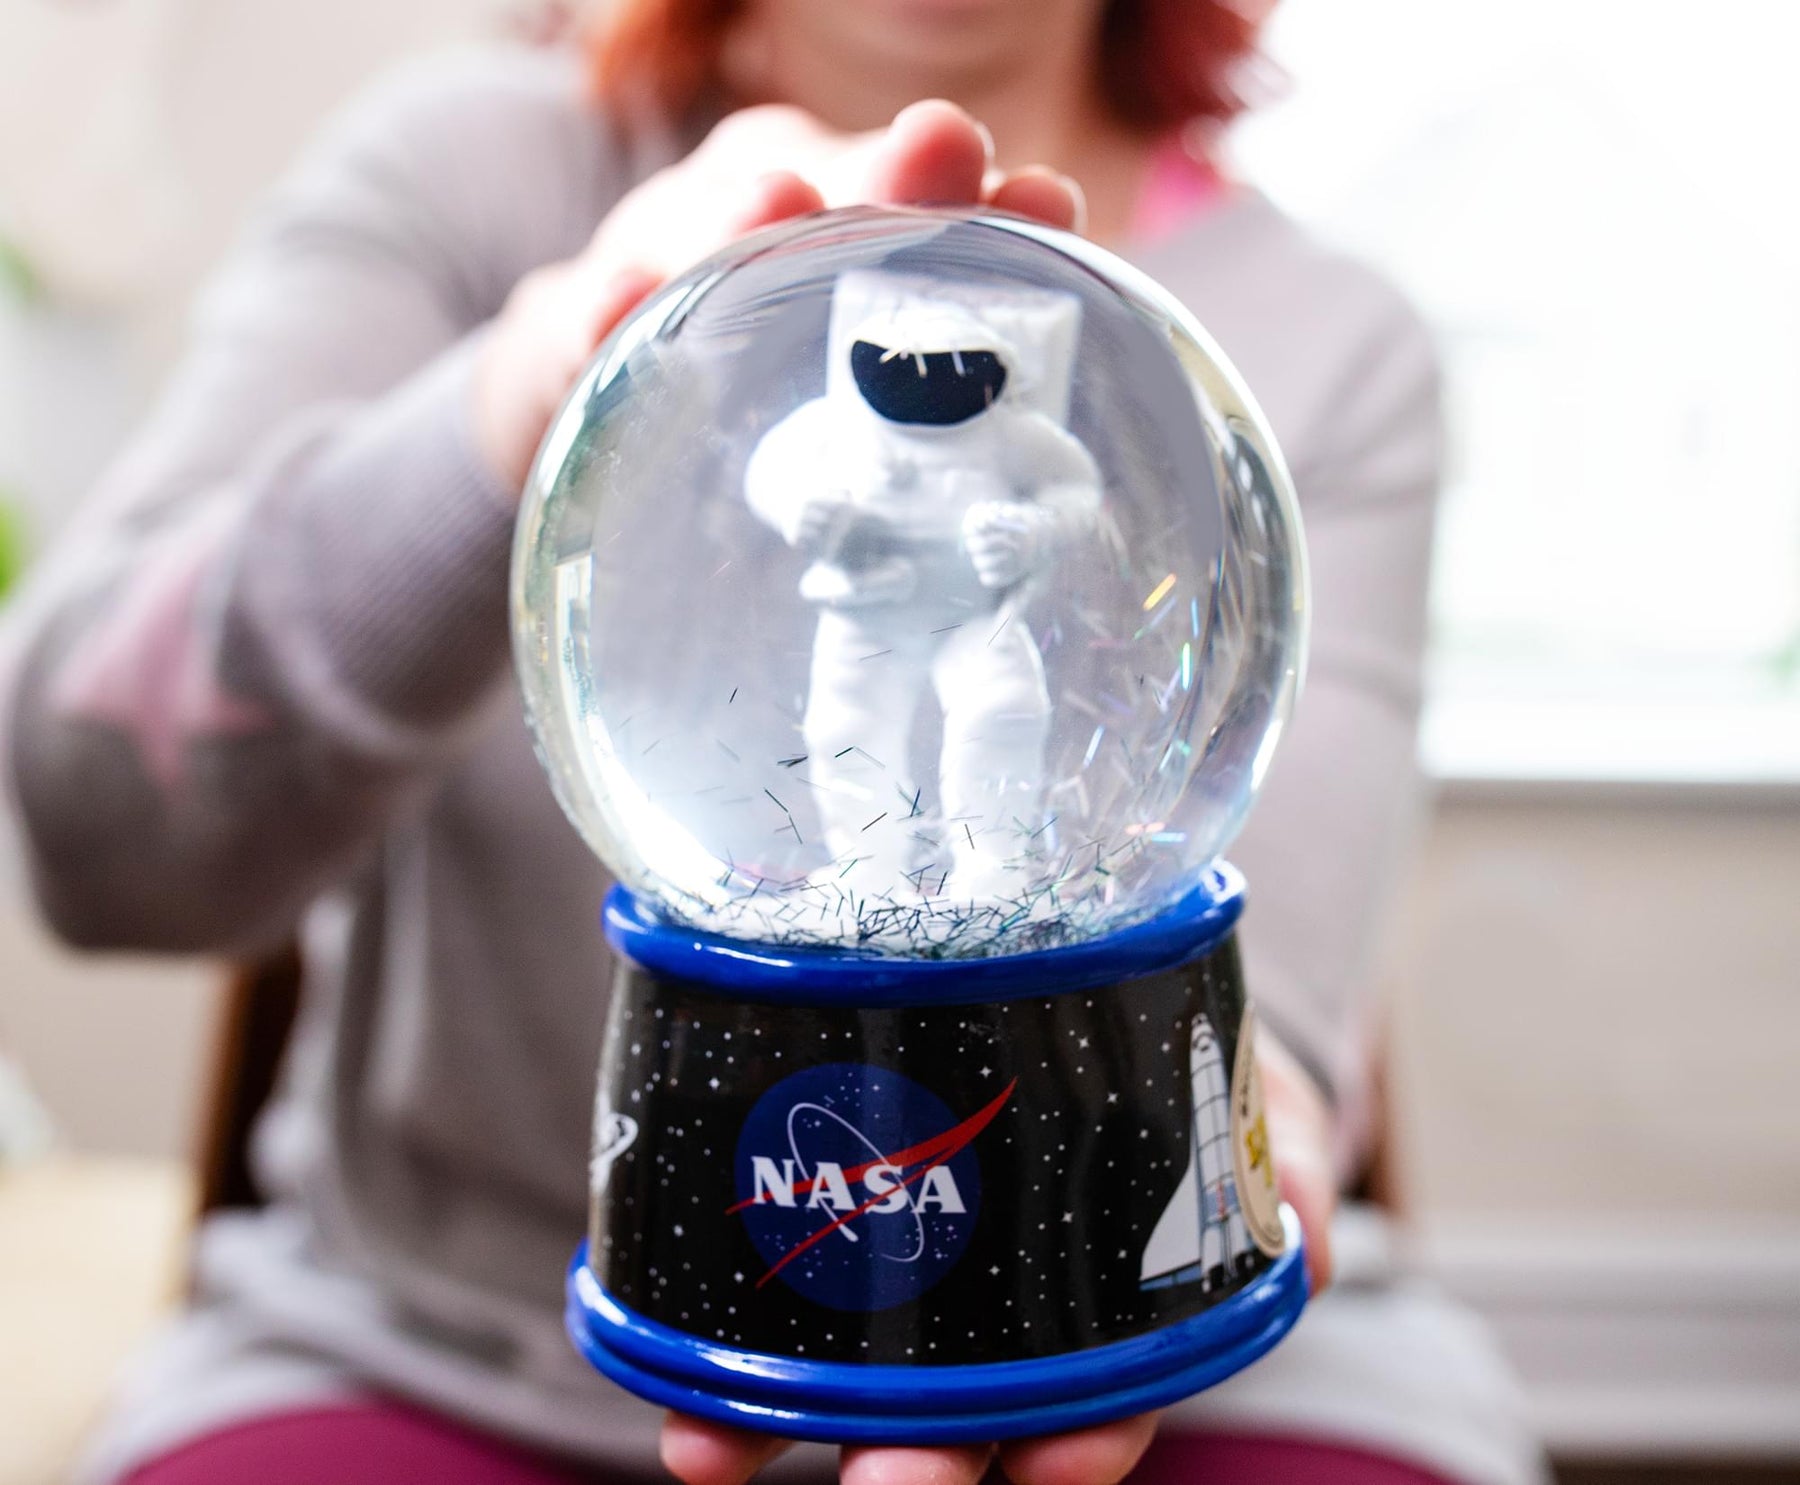 NASA Astronaut Light-Up Collectible Snow Globe | 6 Inches Tall